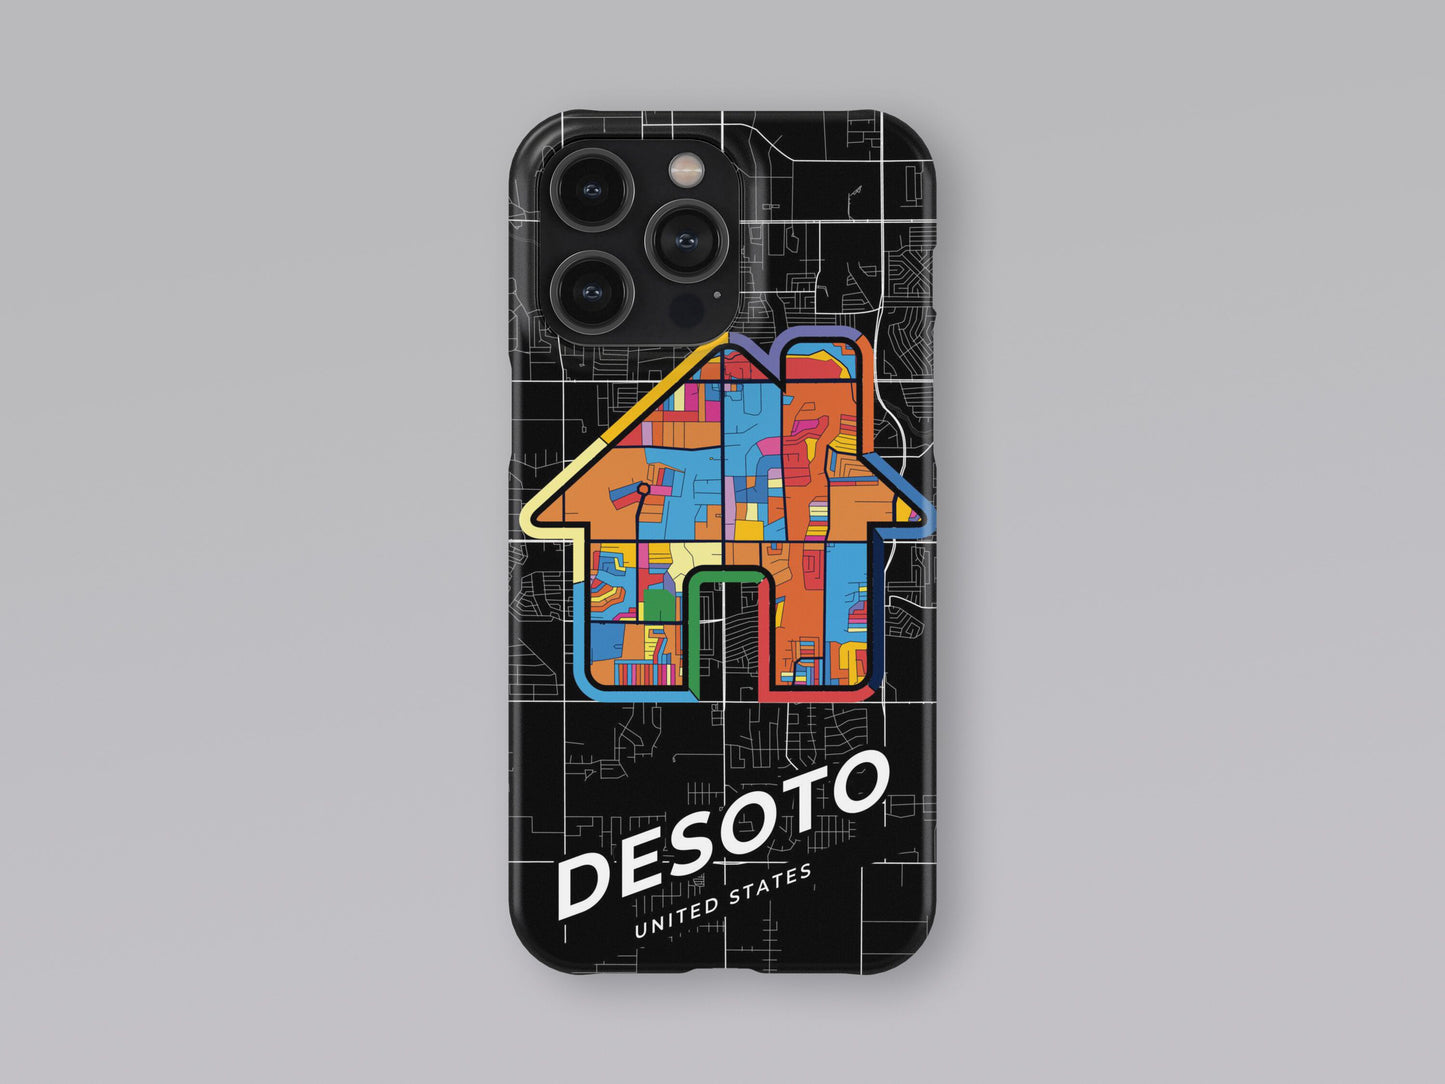 Desoto Texas slim phone case with colorful icon. Birthday, wedding or housewarming gift. Couple match cases. 3